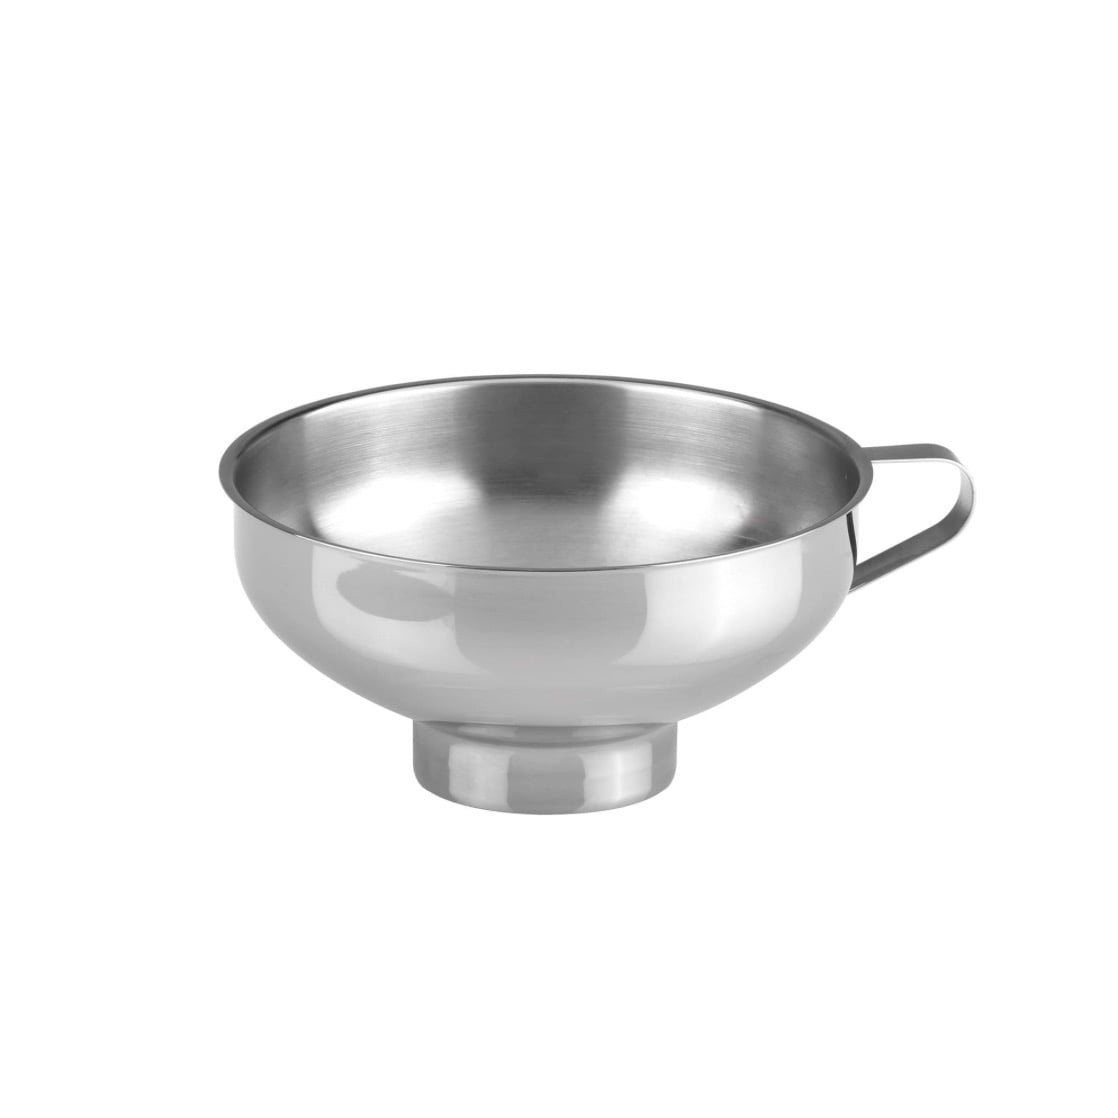 39Stainless Steel Refill Funnel1